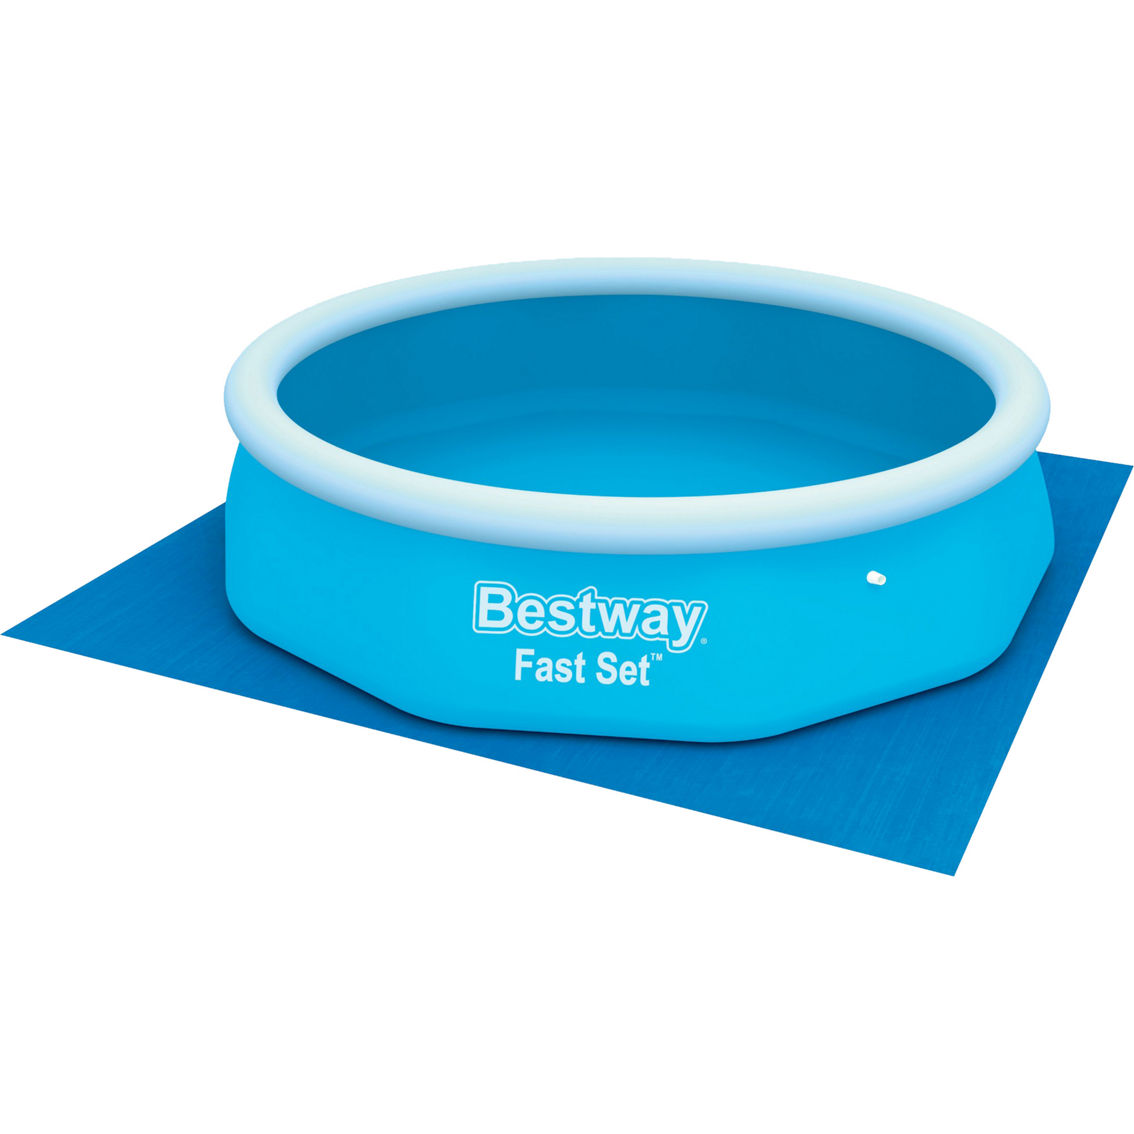 Bestway Flowclear 11 x 11 ft. Ground Cloth - Image 3 of 7